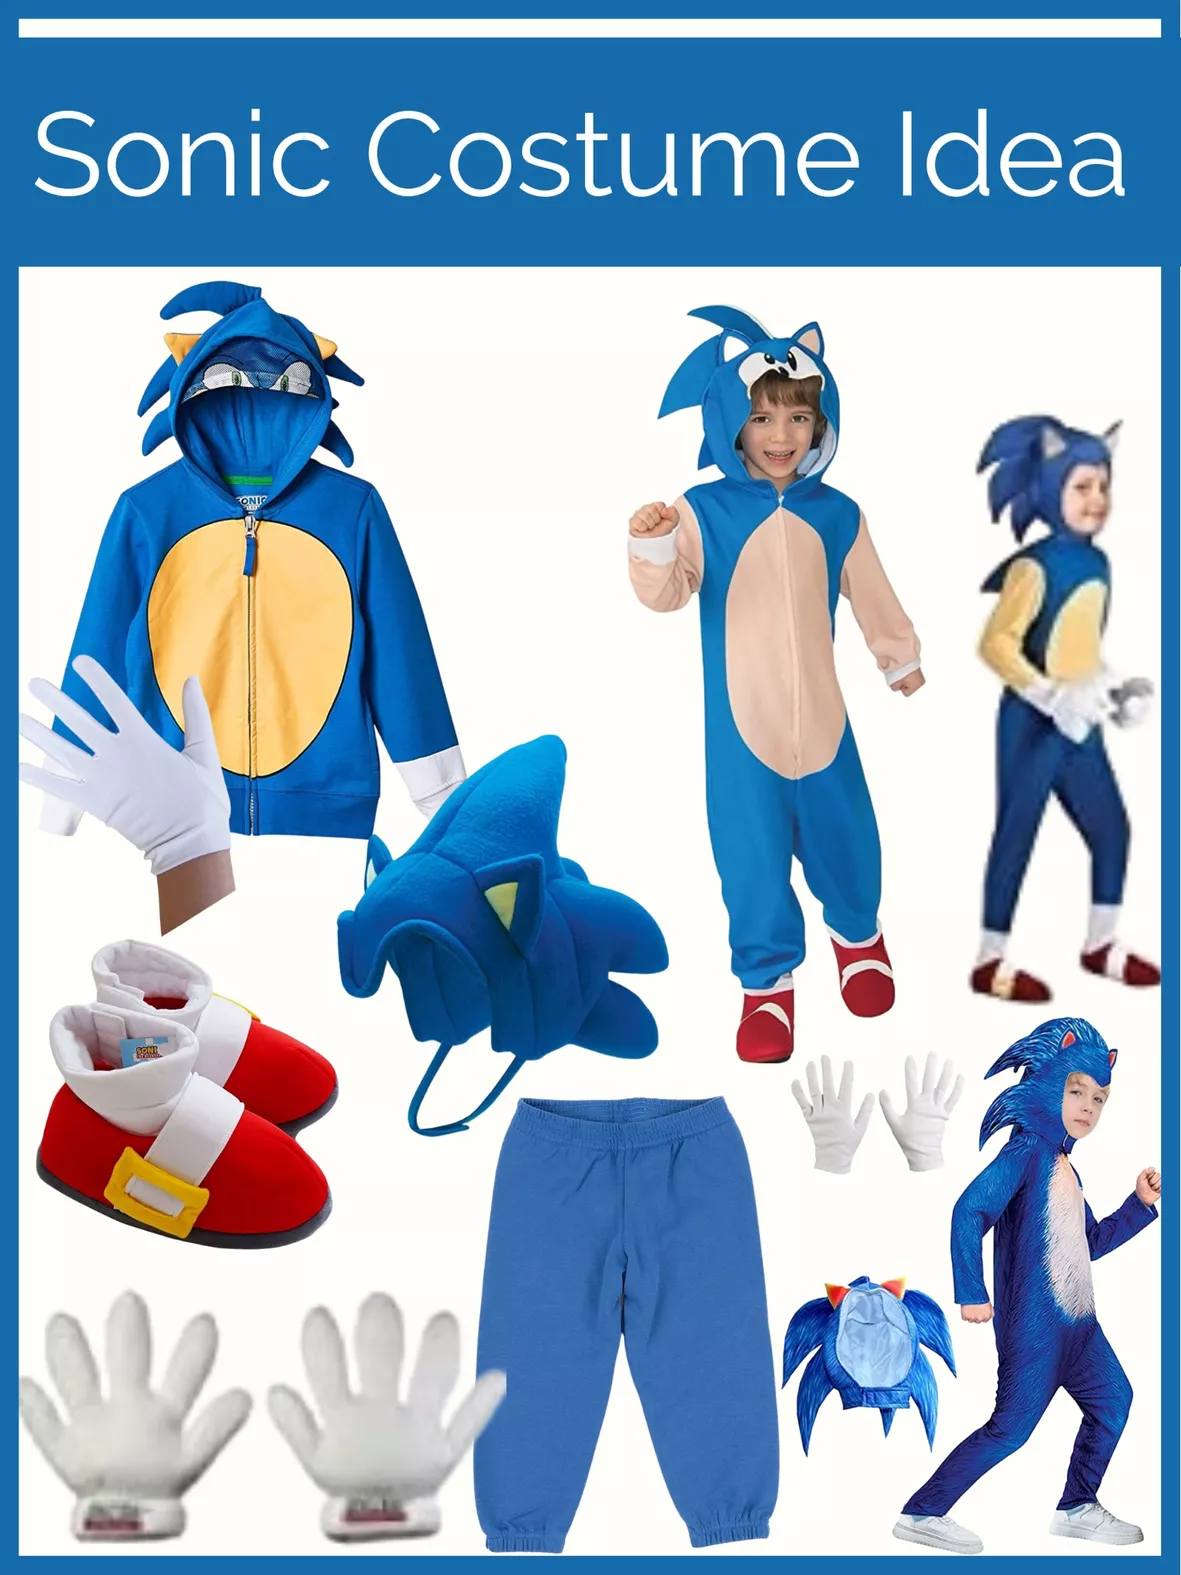  Rubie's Sonic The Hedgehog Child's Deluxe Costume, Large,  701140, As Shown : Clothing, Shoes & Jewelry